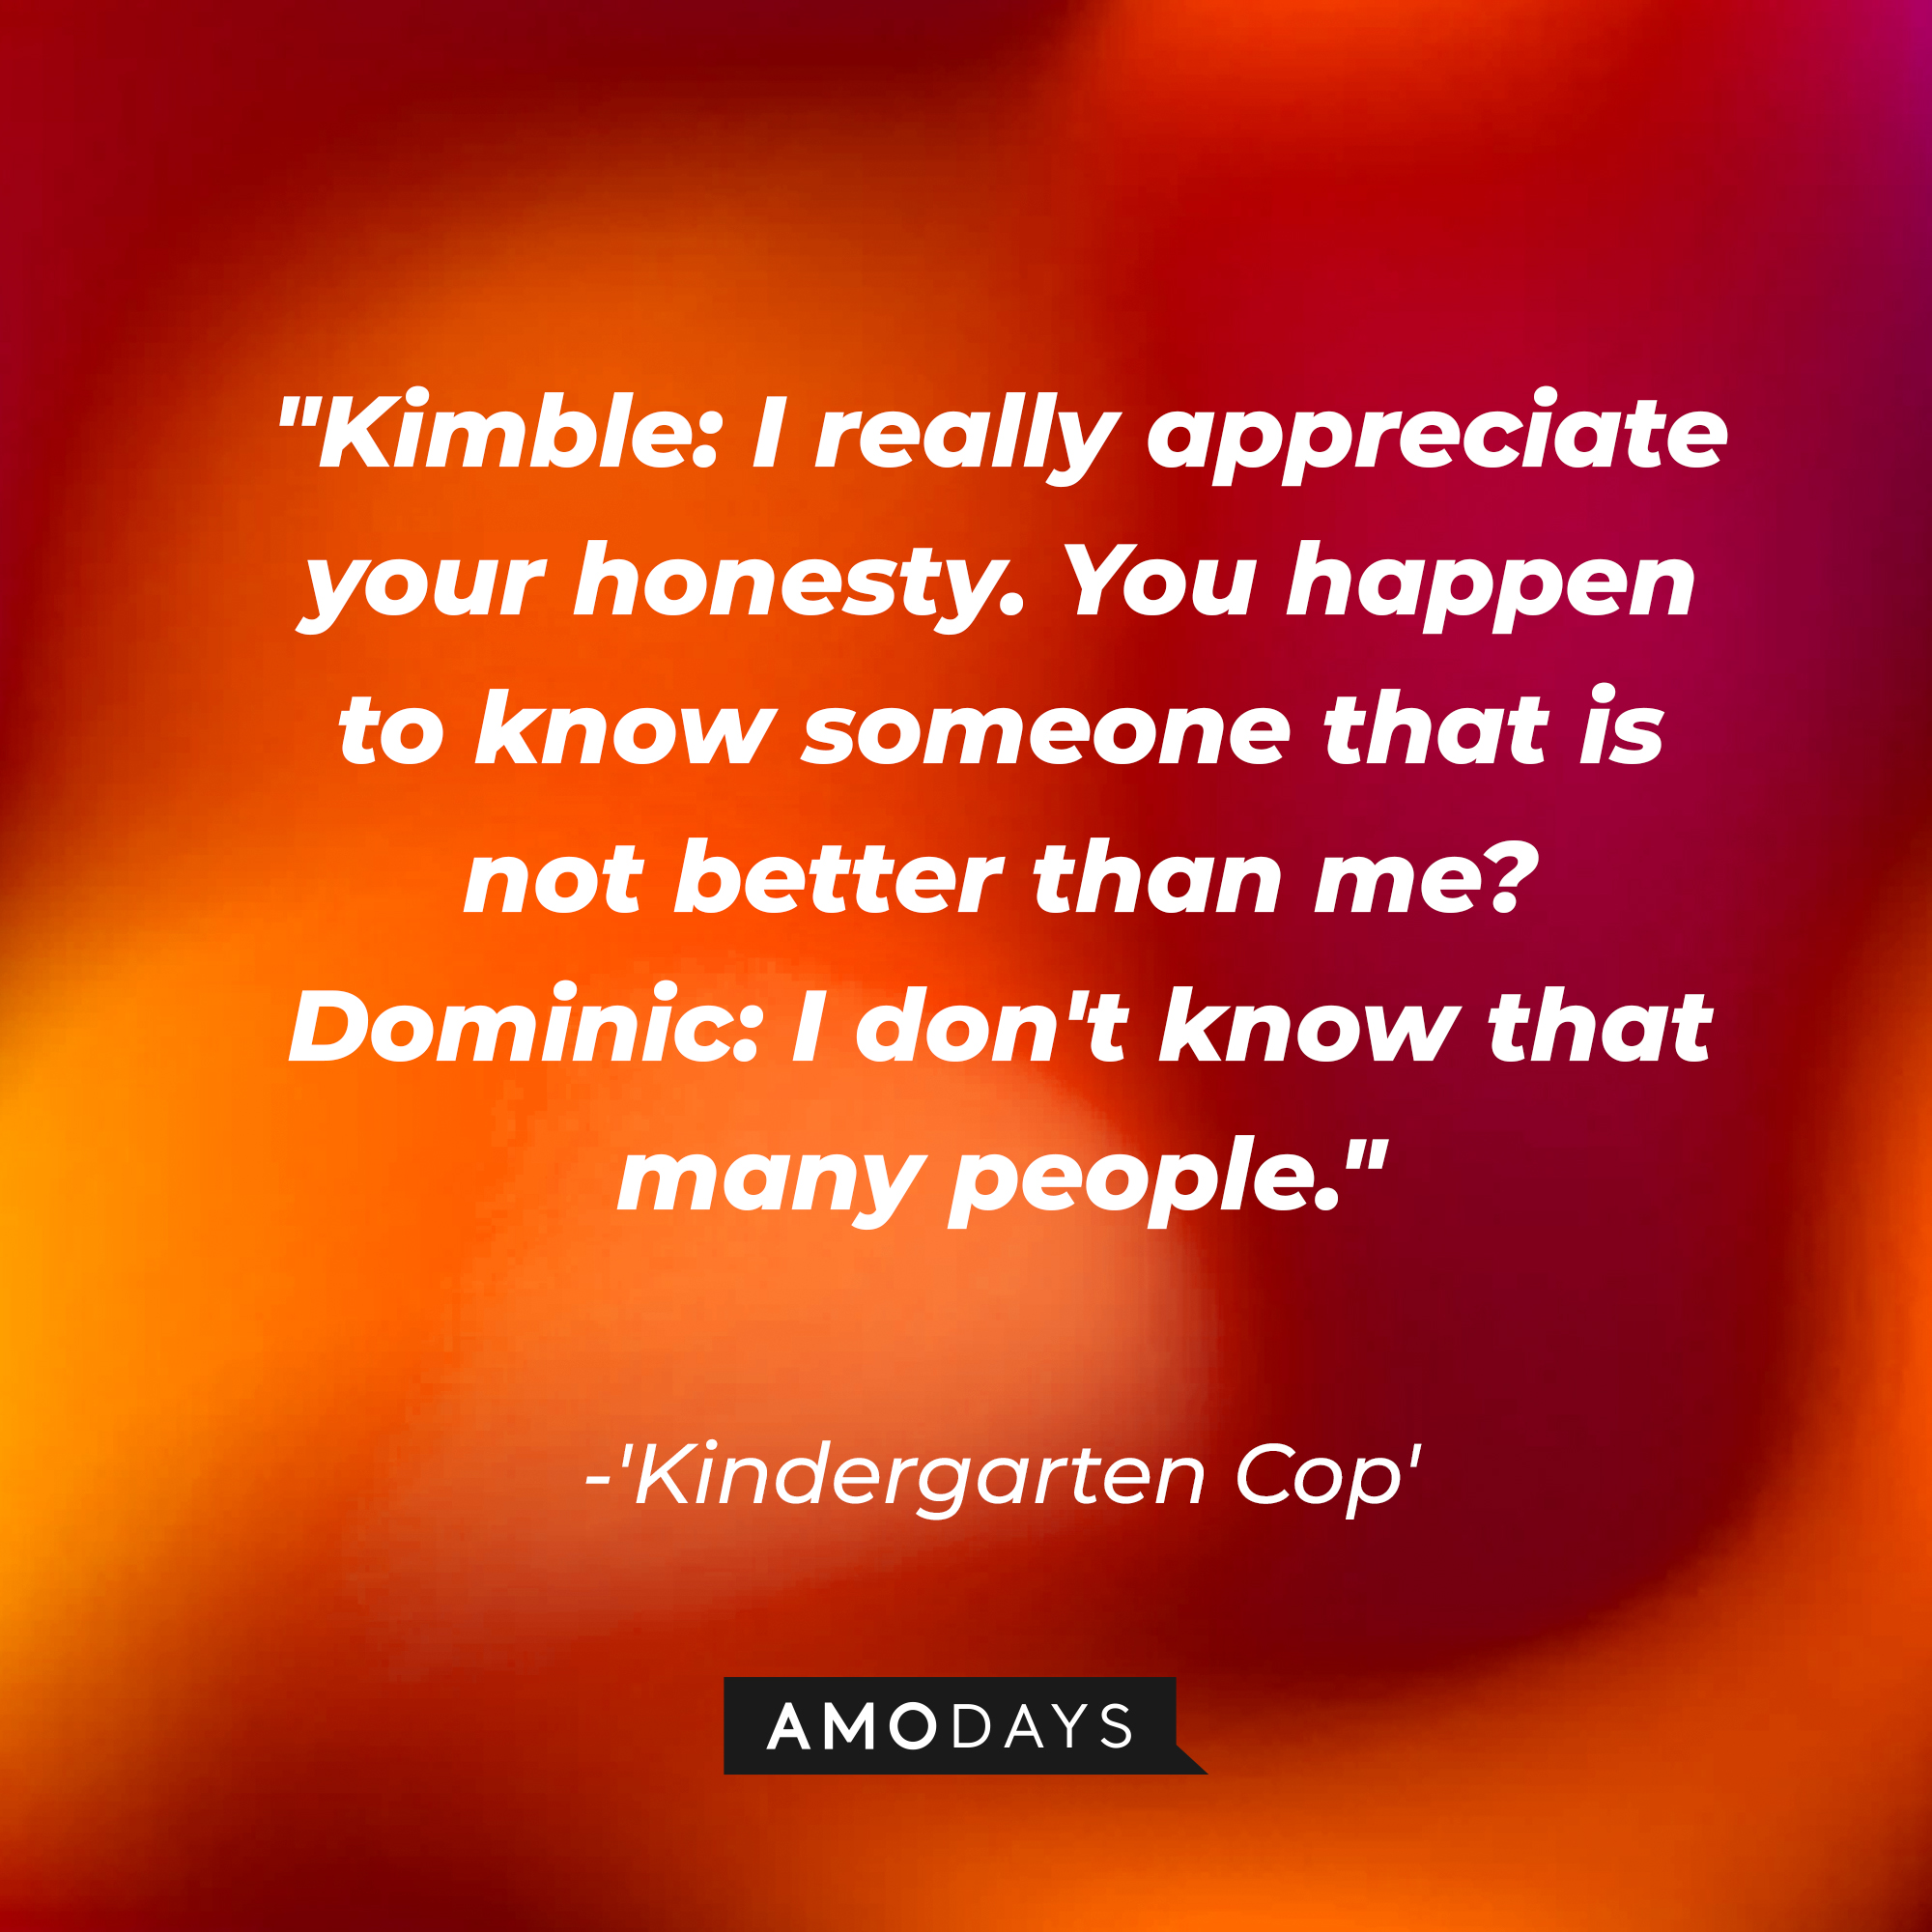 Detective John Kimble and Dominic's dialogue in "Kindergarten Cop:" "Kimble: I really appreciate your honesty. You happen to know someone that is not better than me? ; Dominic: I don't know that many people." | Source: AmoDays